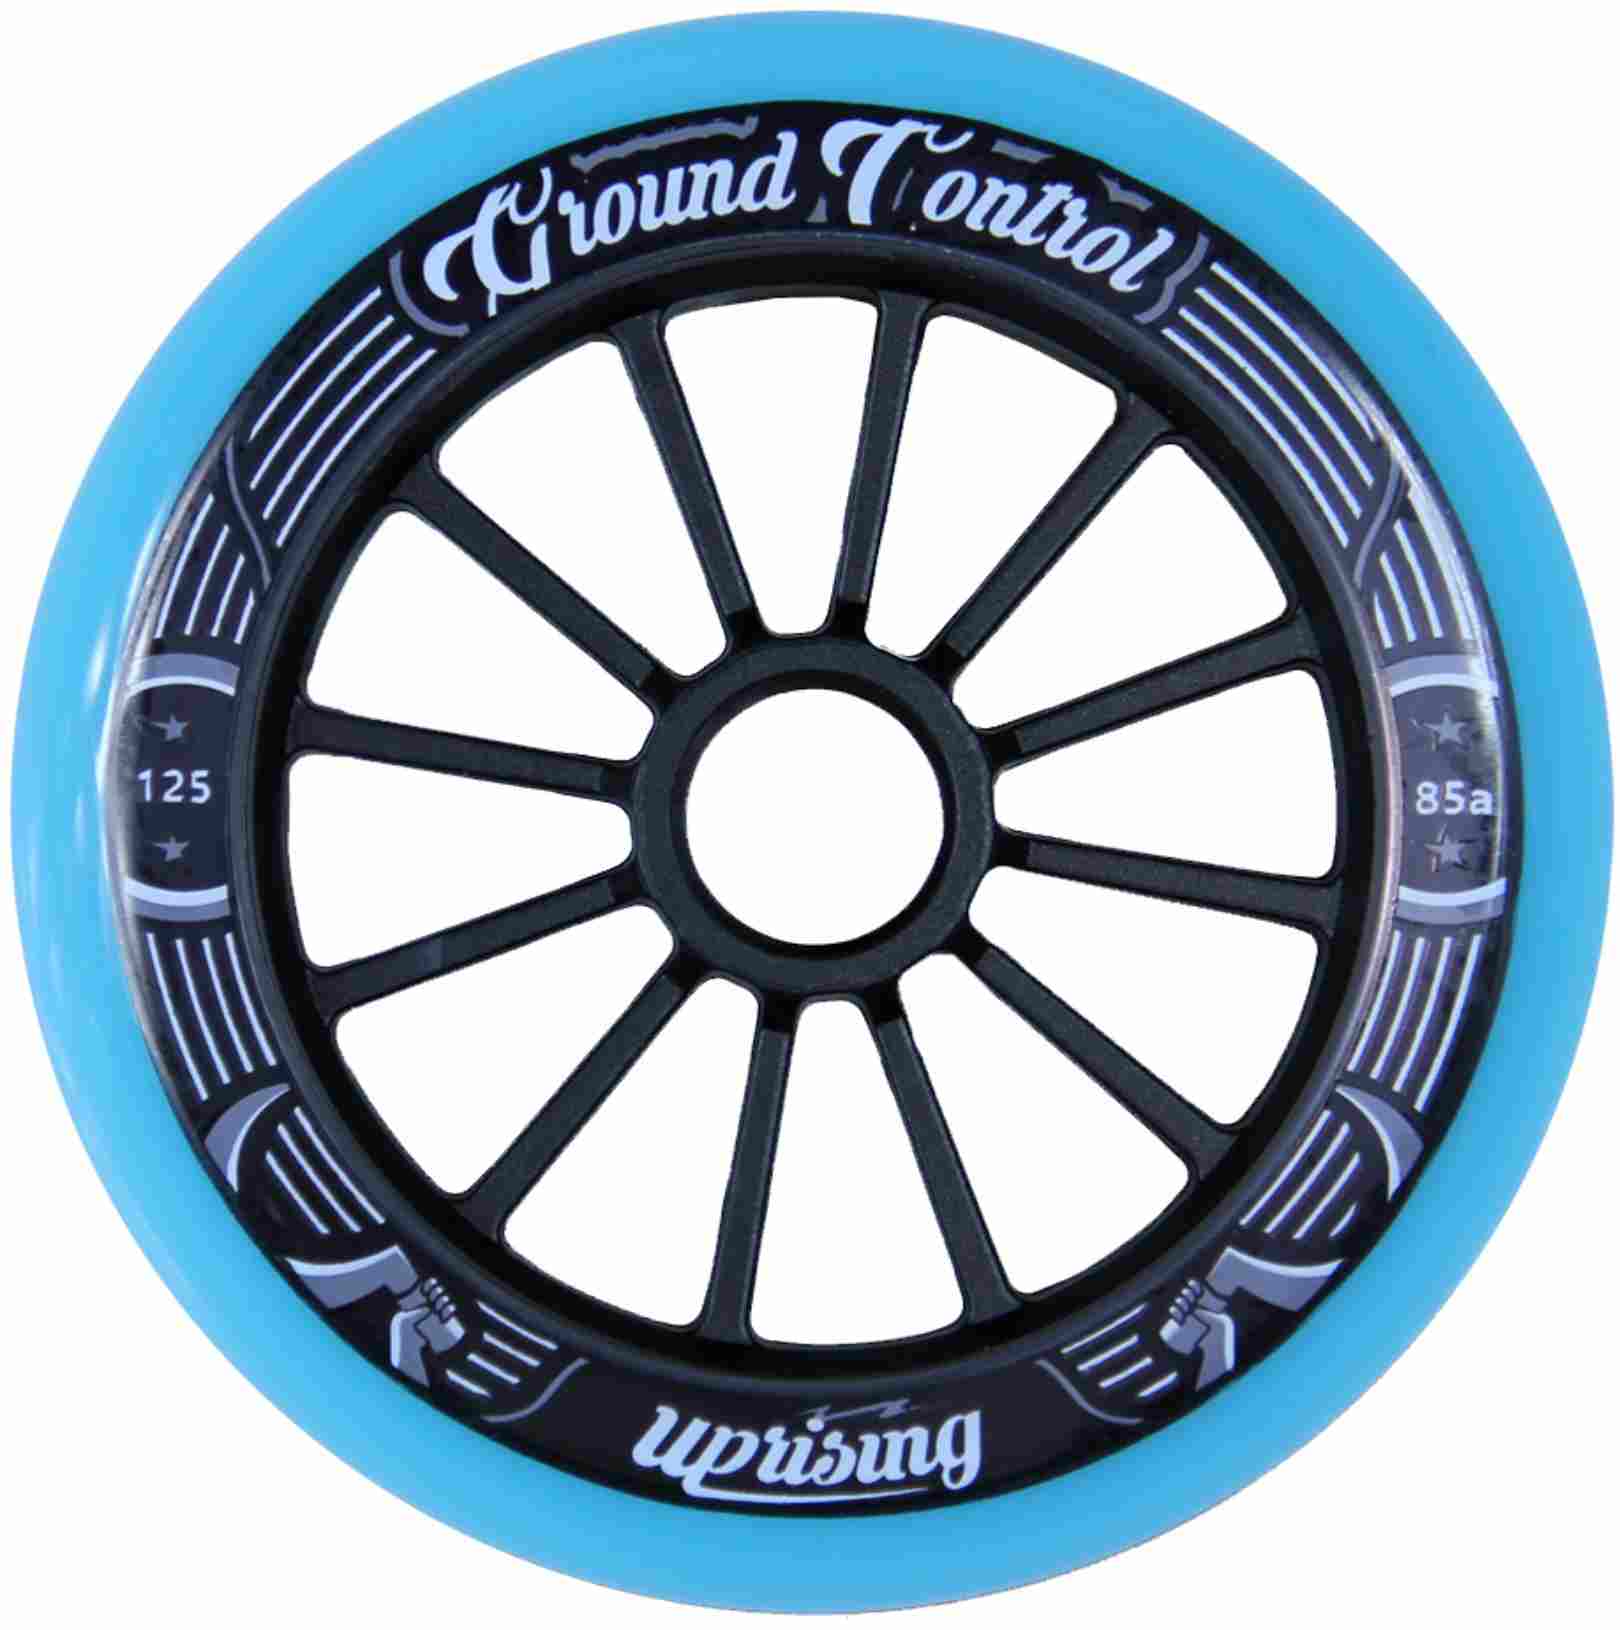 Ground Control FSK inline skate wheel of 125 mm and 85A durometer in turquoise